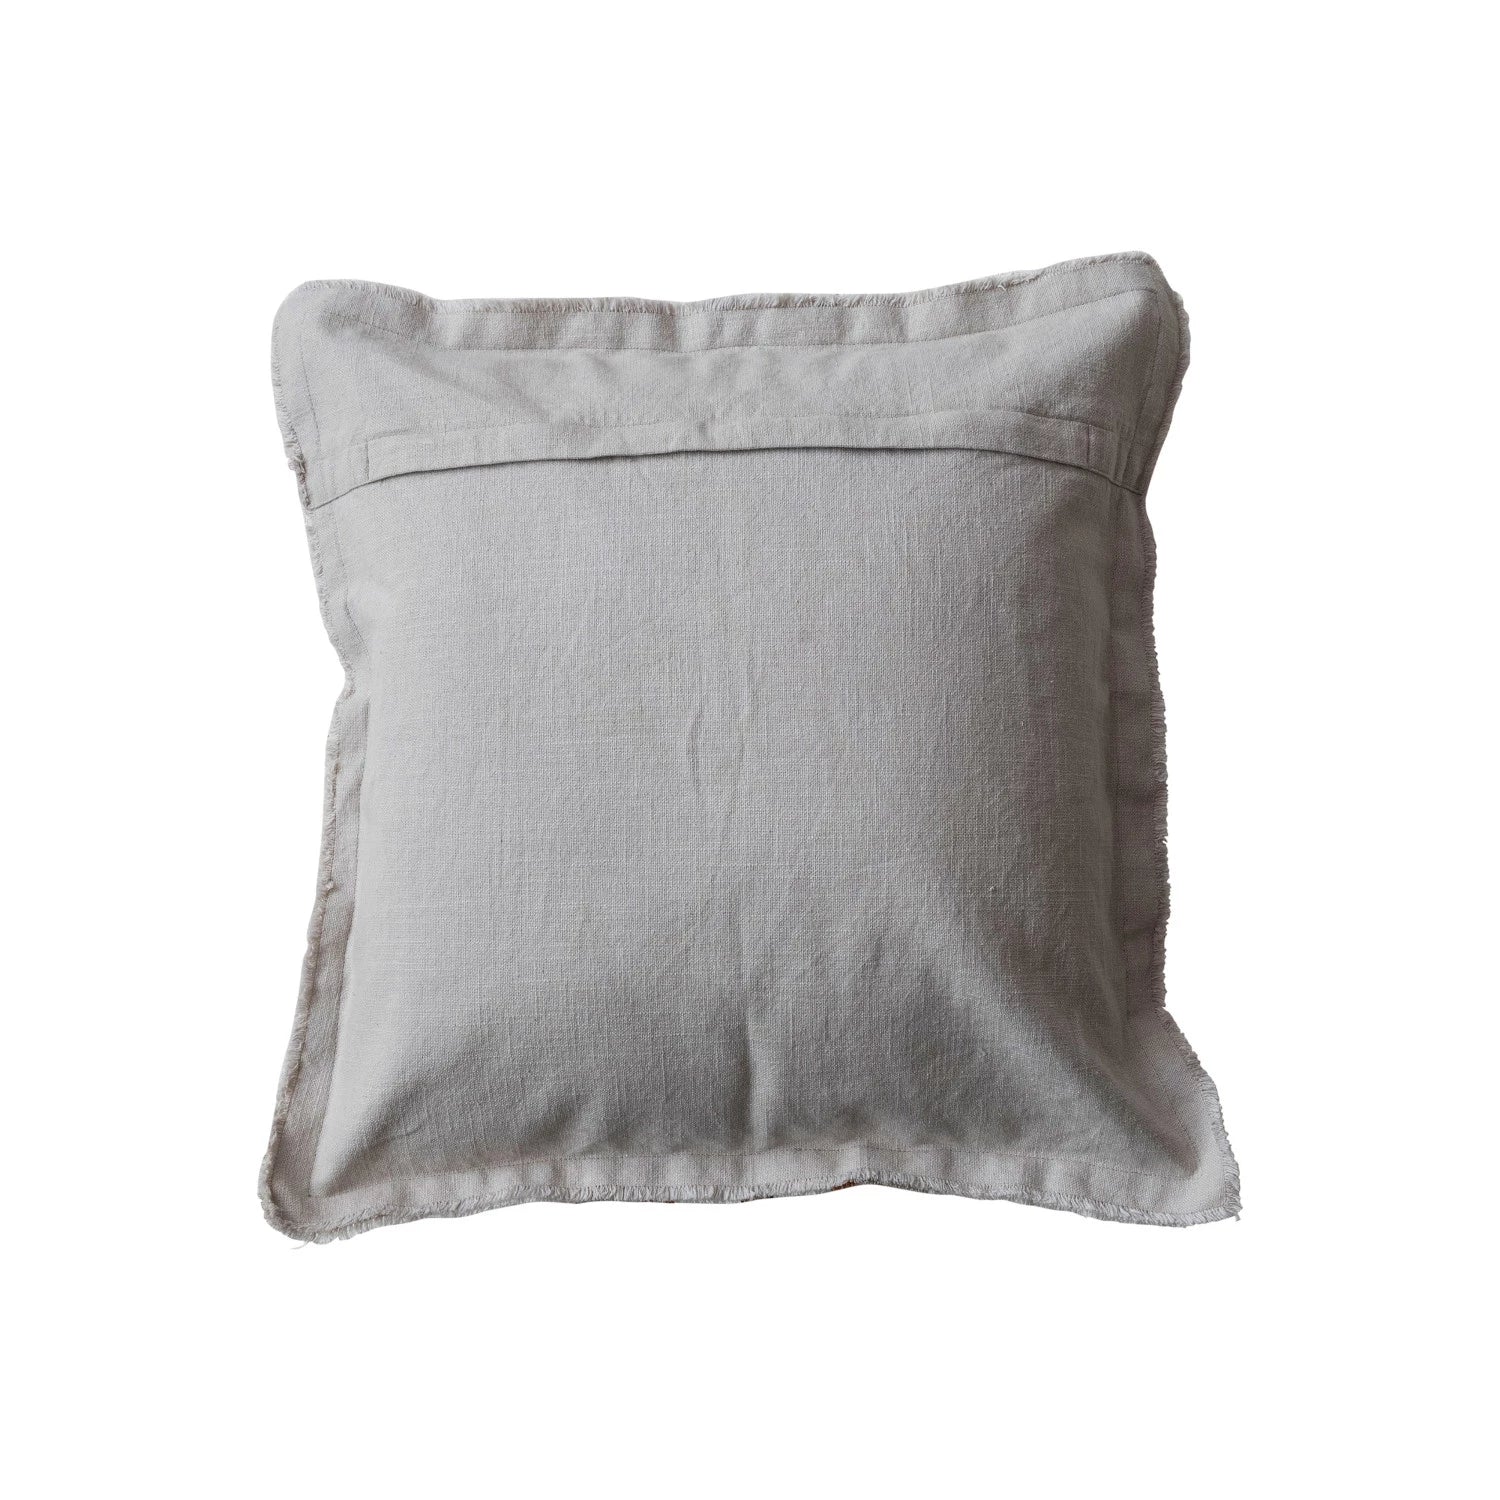 Woven Linen Pillow With Stripes